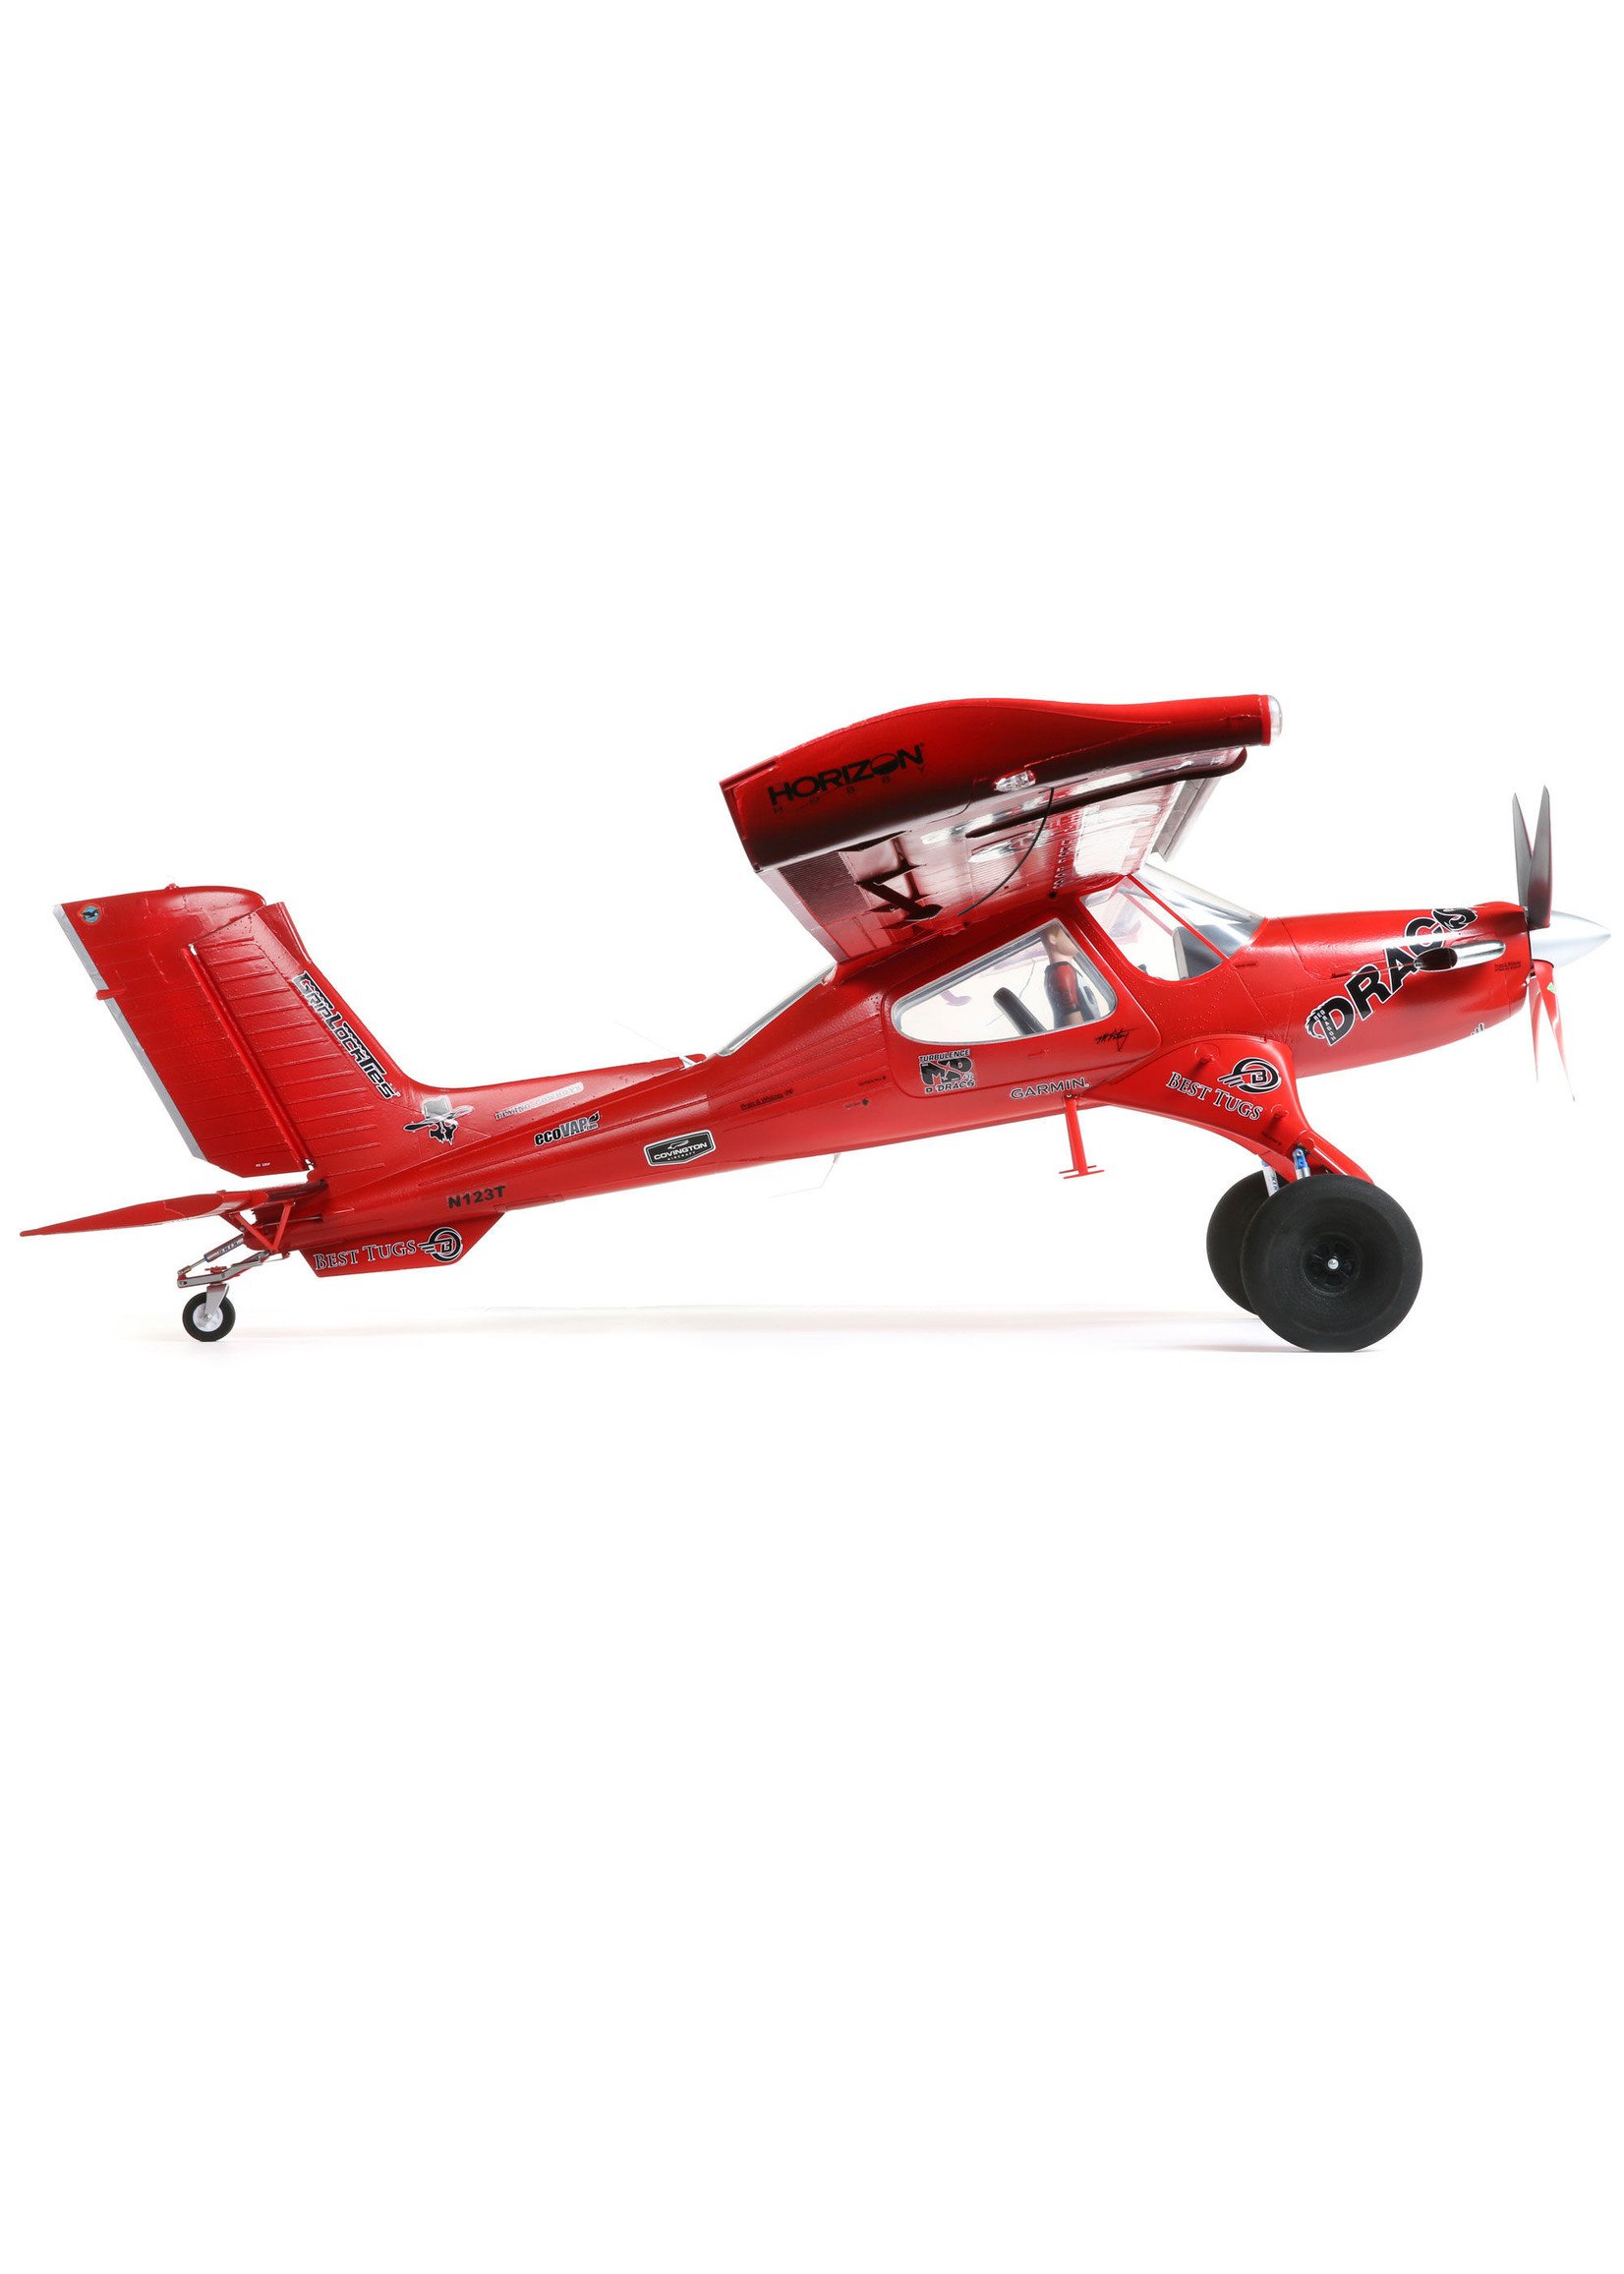 E-flite DRACO 2.0m Smart BNF Basic with AS3X and SAFE Select